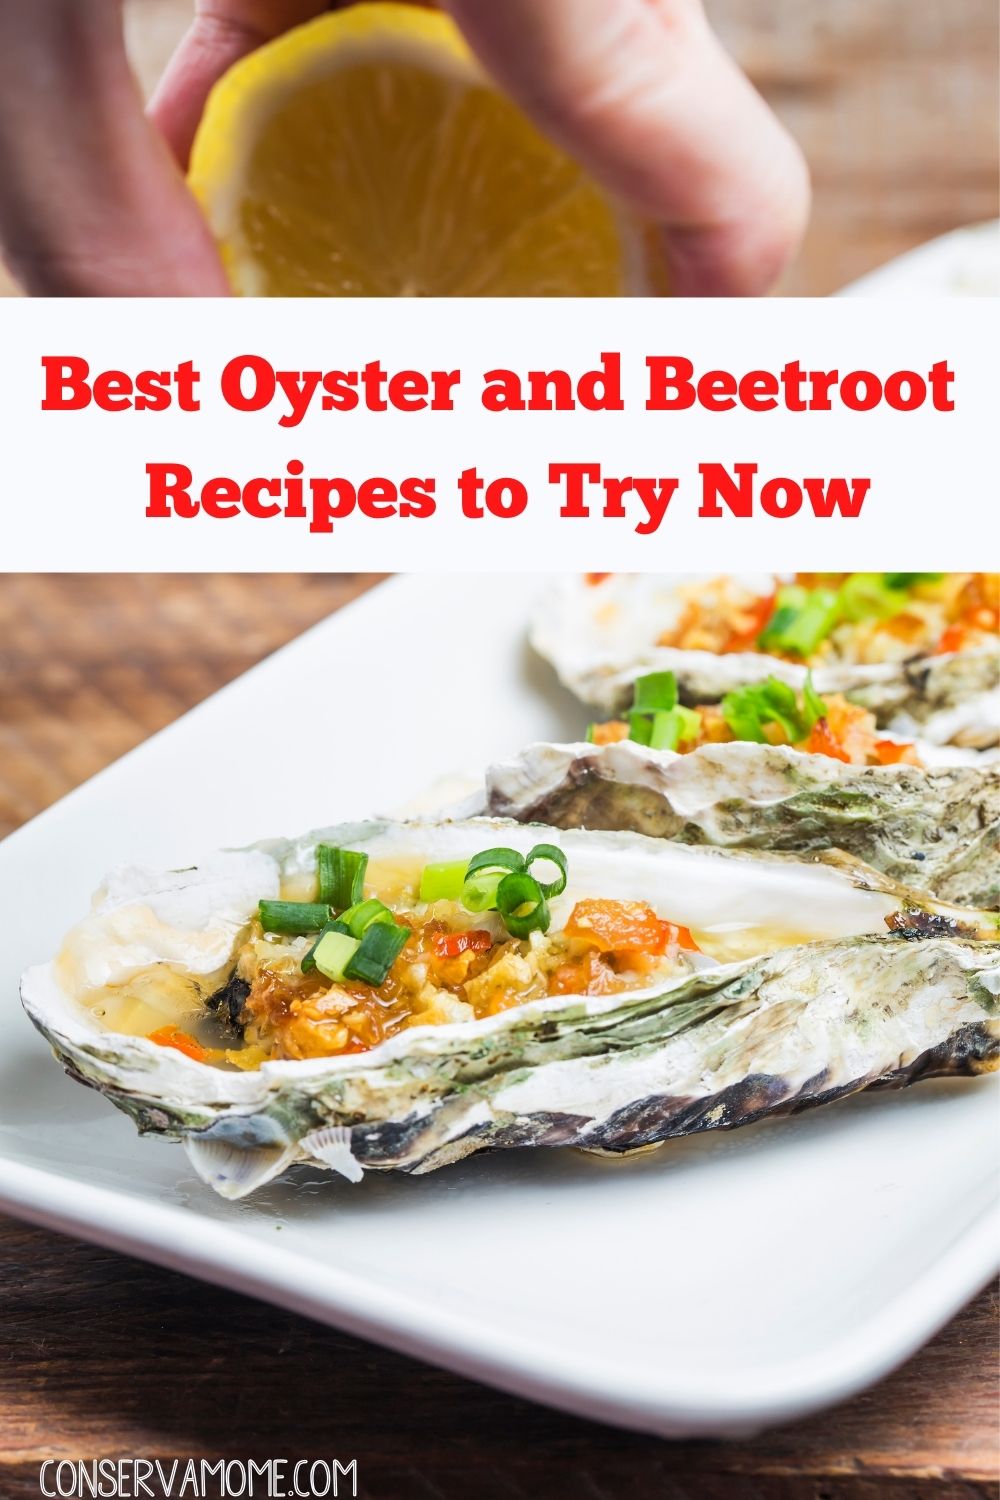 Best Oyster and Beetroot Recipes